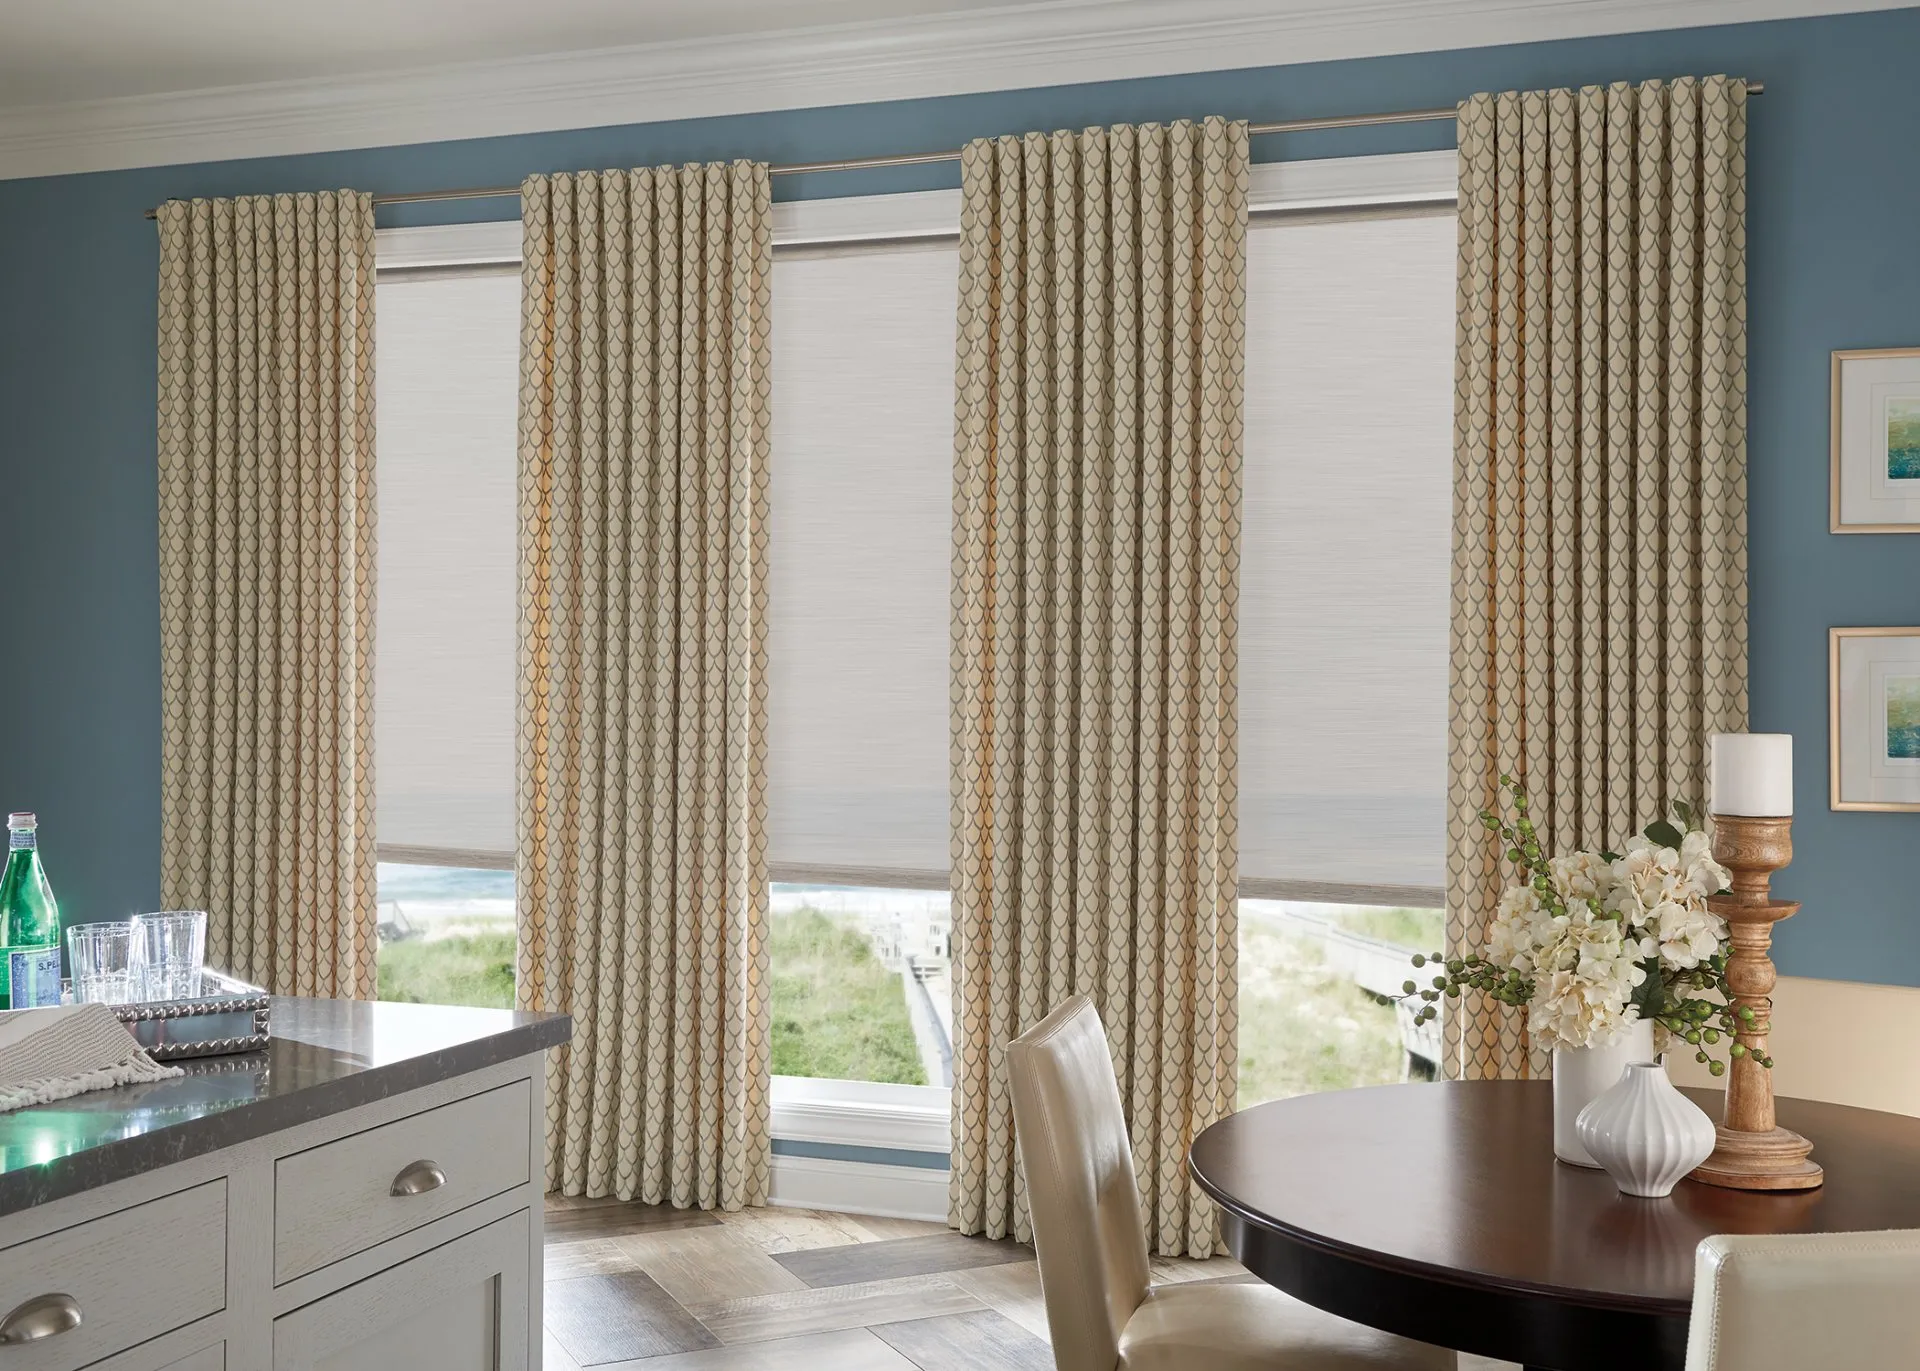 Blinds Draped on a Window